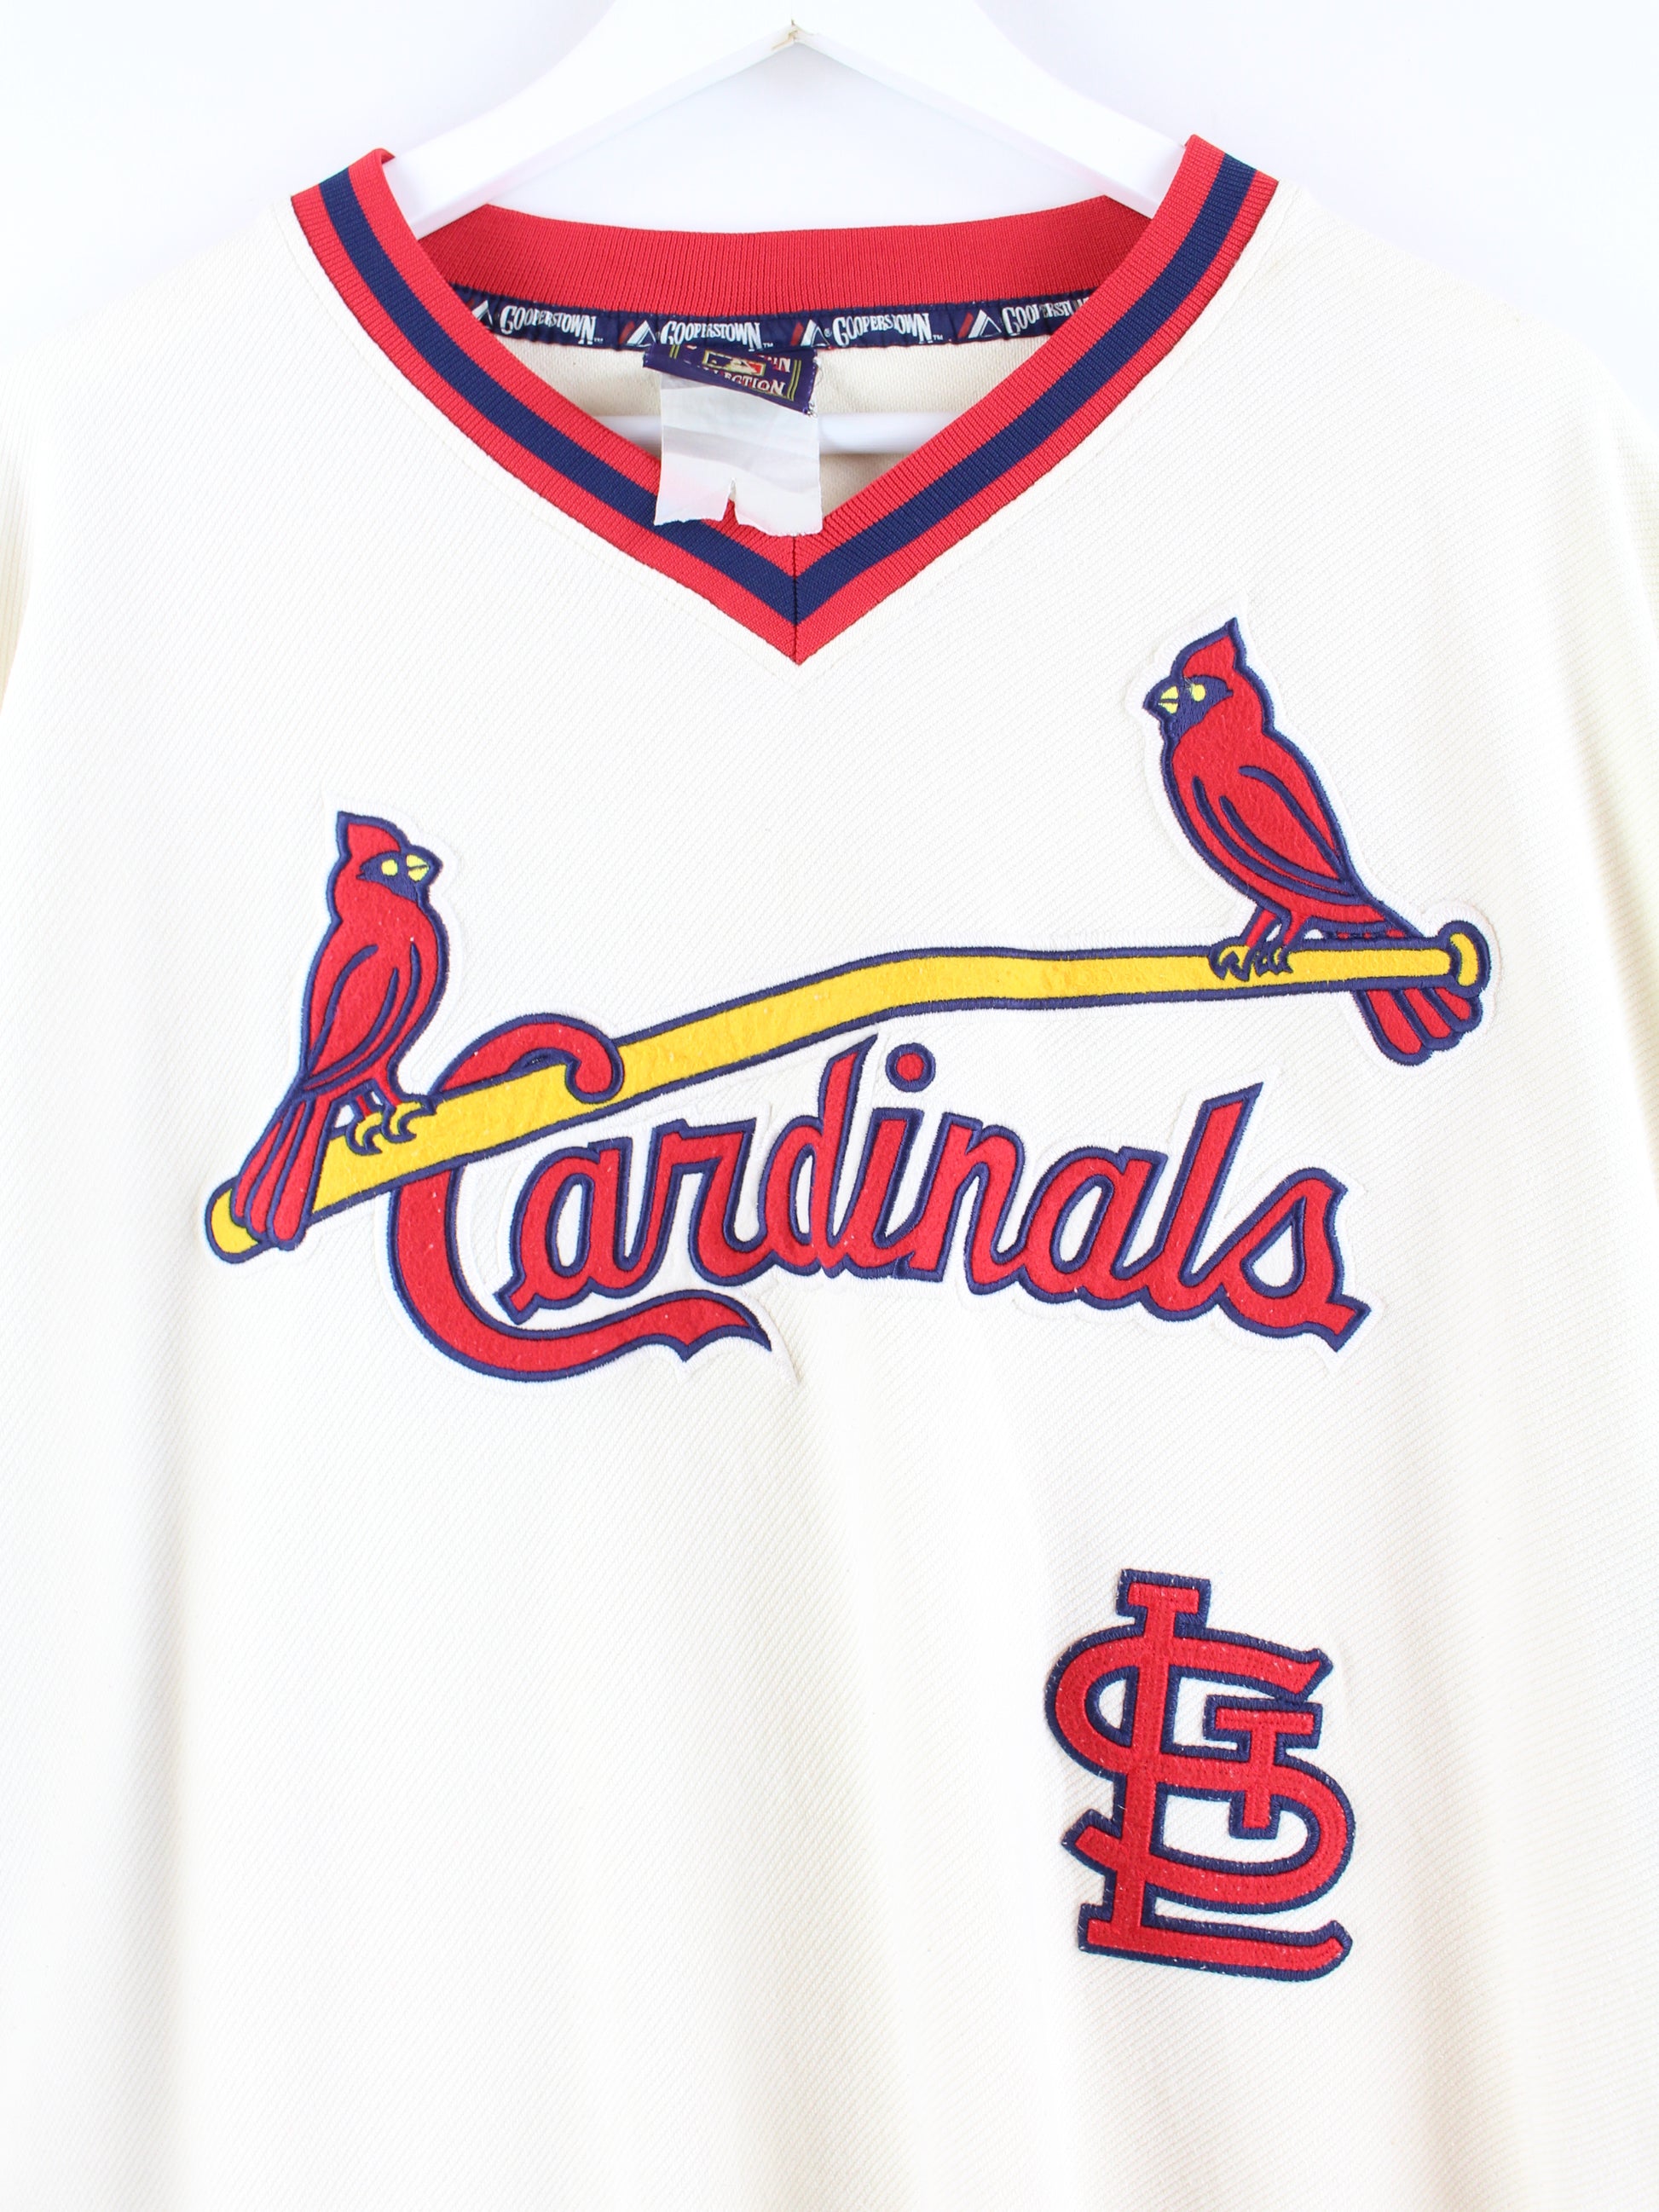 St. Louis Cardinals Pro Standard Cooperstown Collection Old English T-Shirt  - Cream